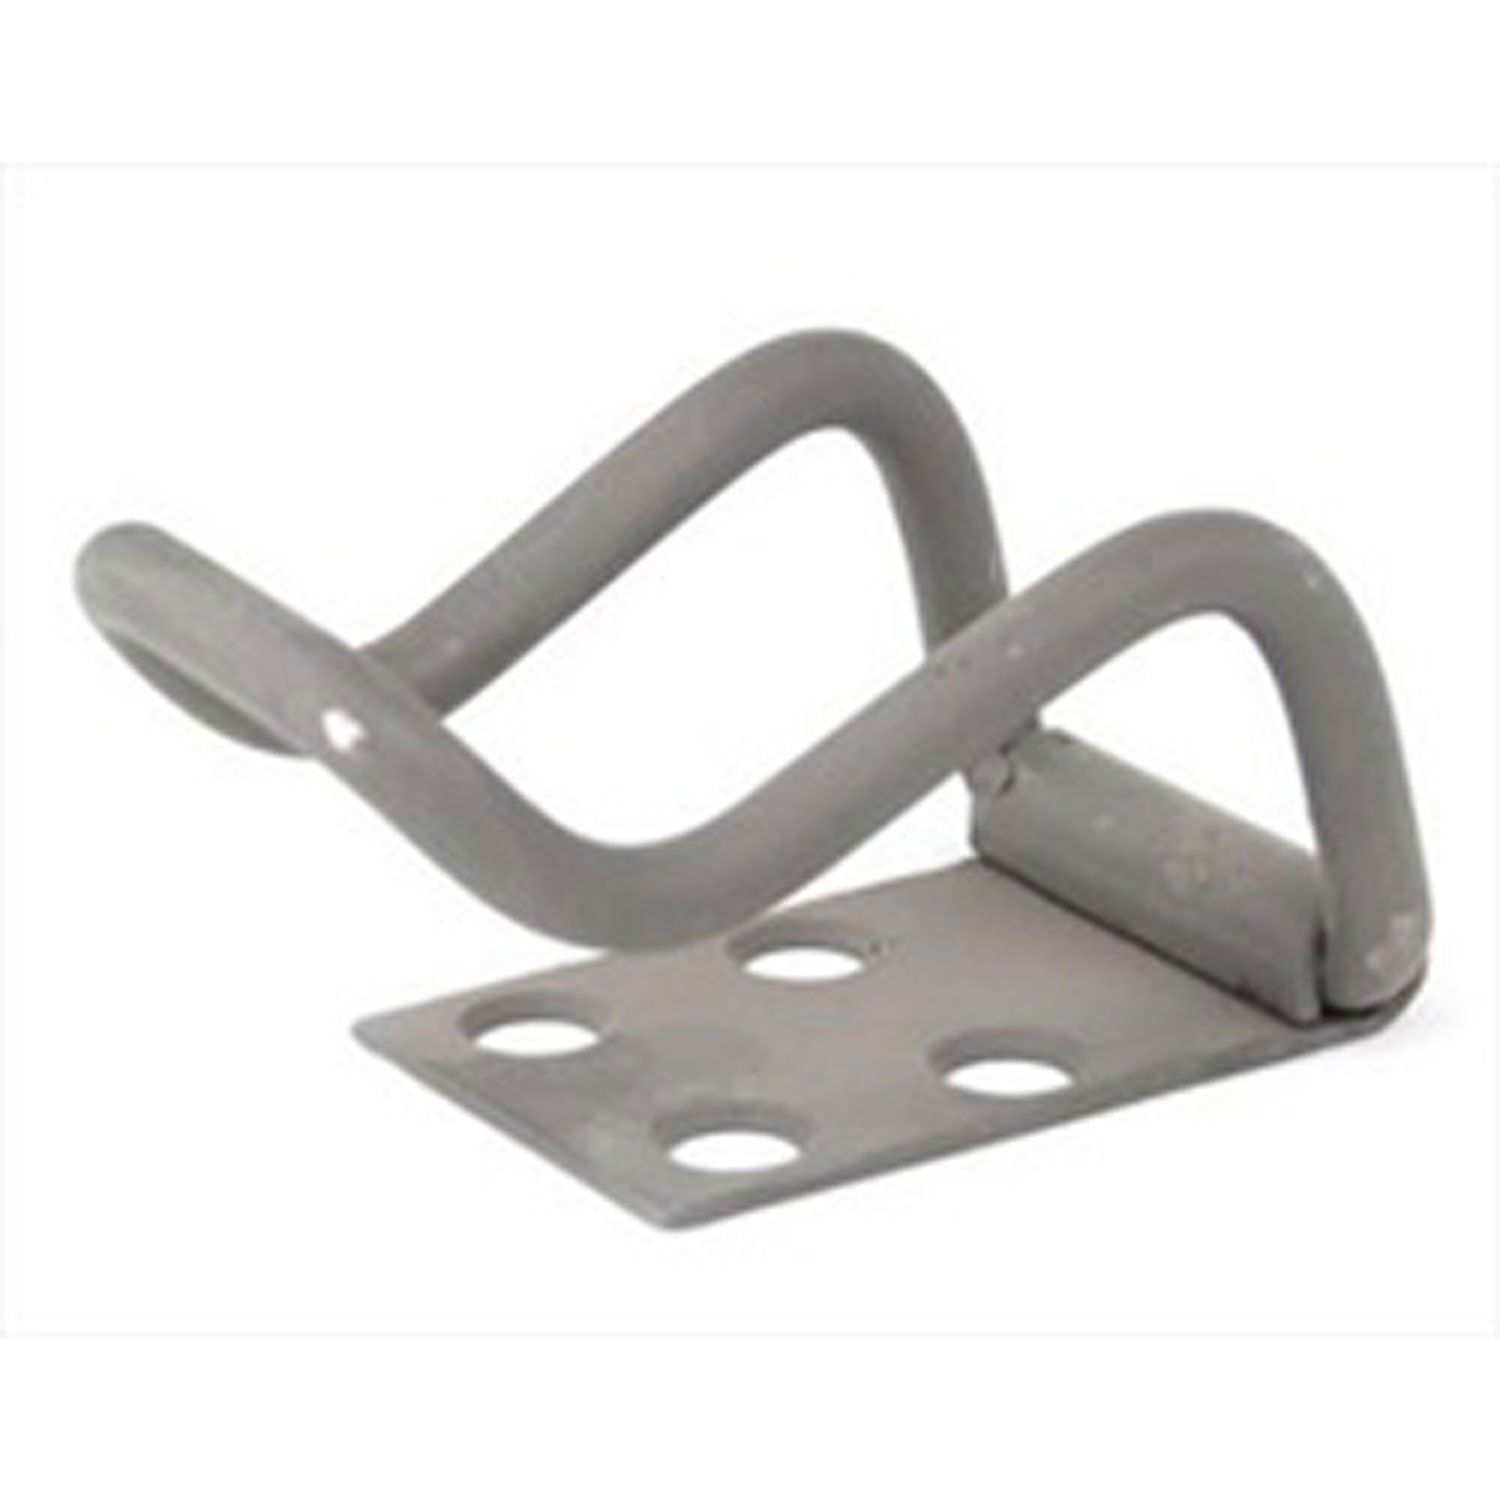 Replacement rear axe clamp from Omix-ADA, Fits 50-52 Willys M38.